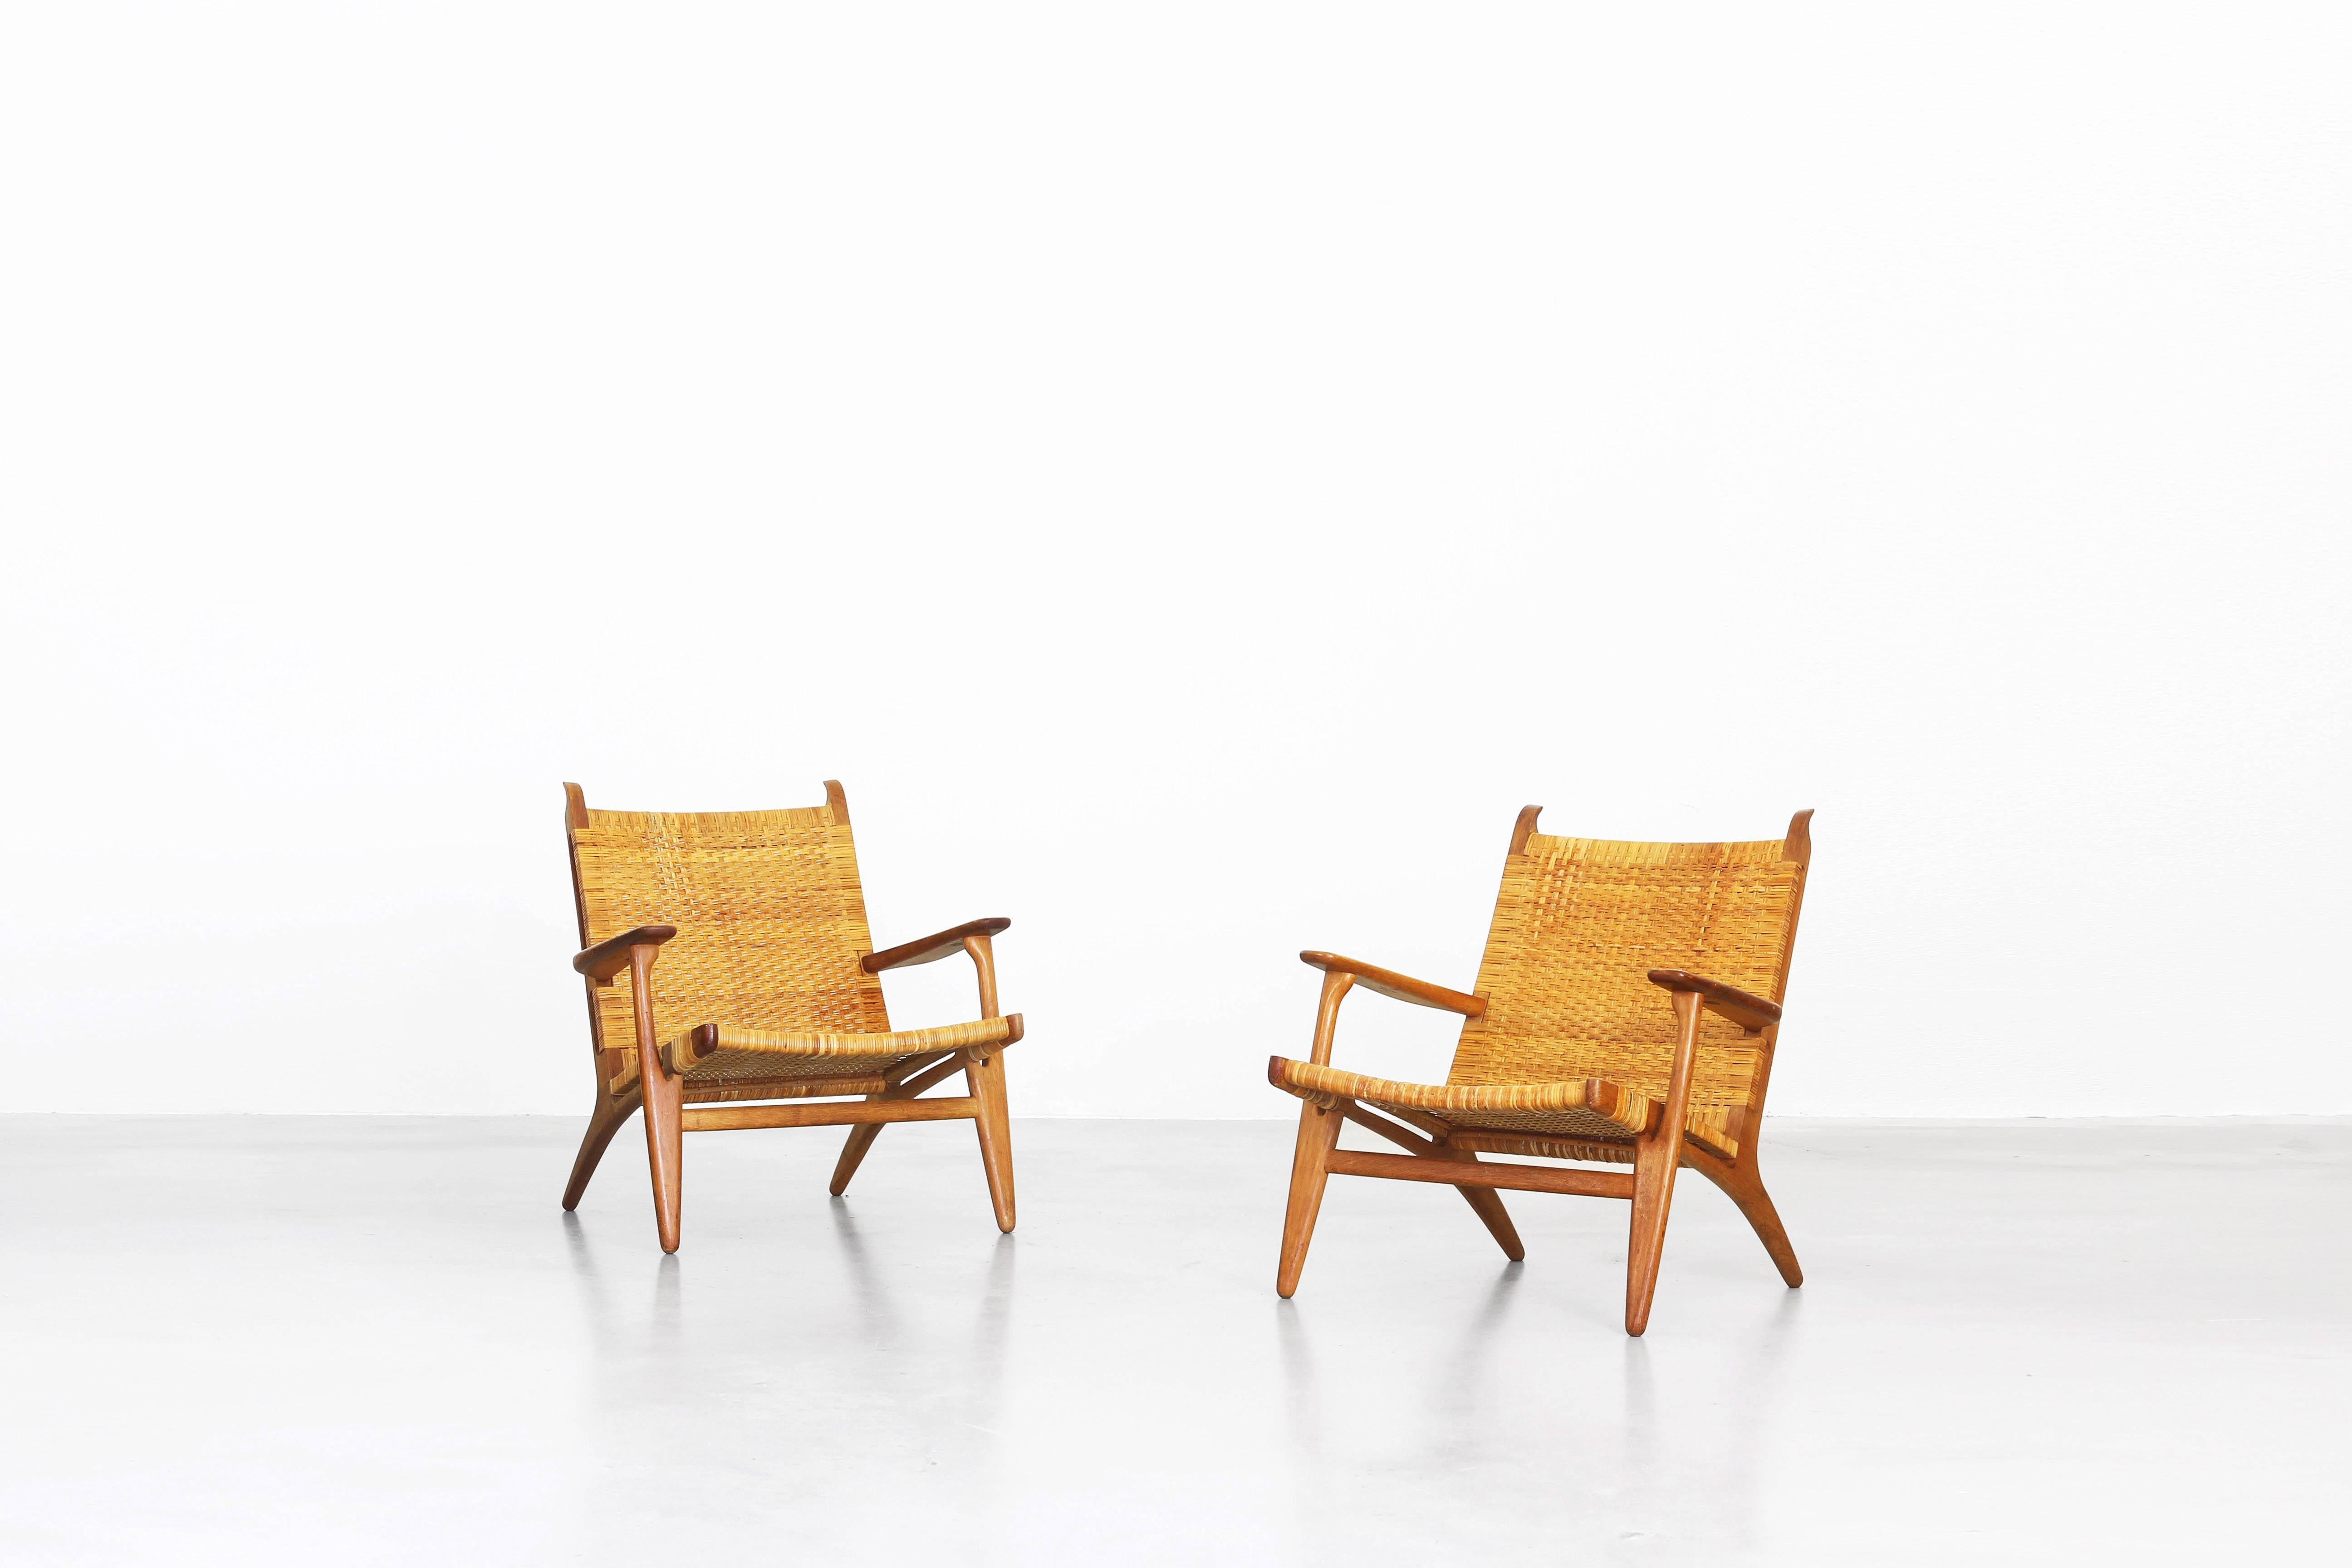 A very beautiful and rare pair of lounge chairs designed by Hans J. Wegner for Carl Hansen in 1949, Denmark. Both lounge chairs are in a very good condition with just little traces of usage. They come with a great patinated oakwood frame and a woven